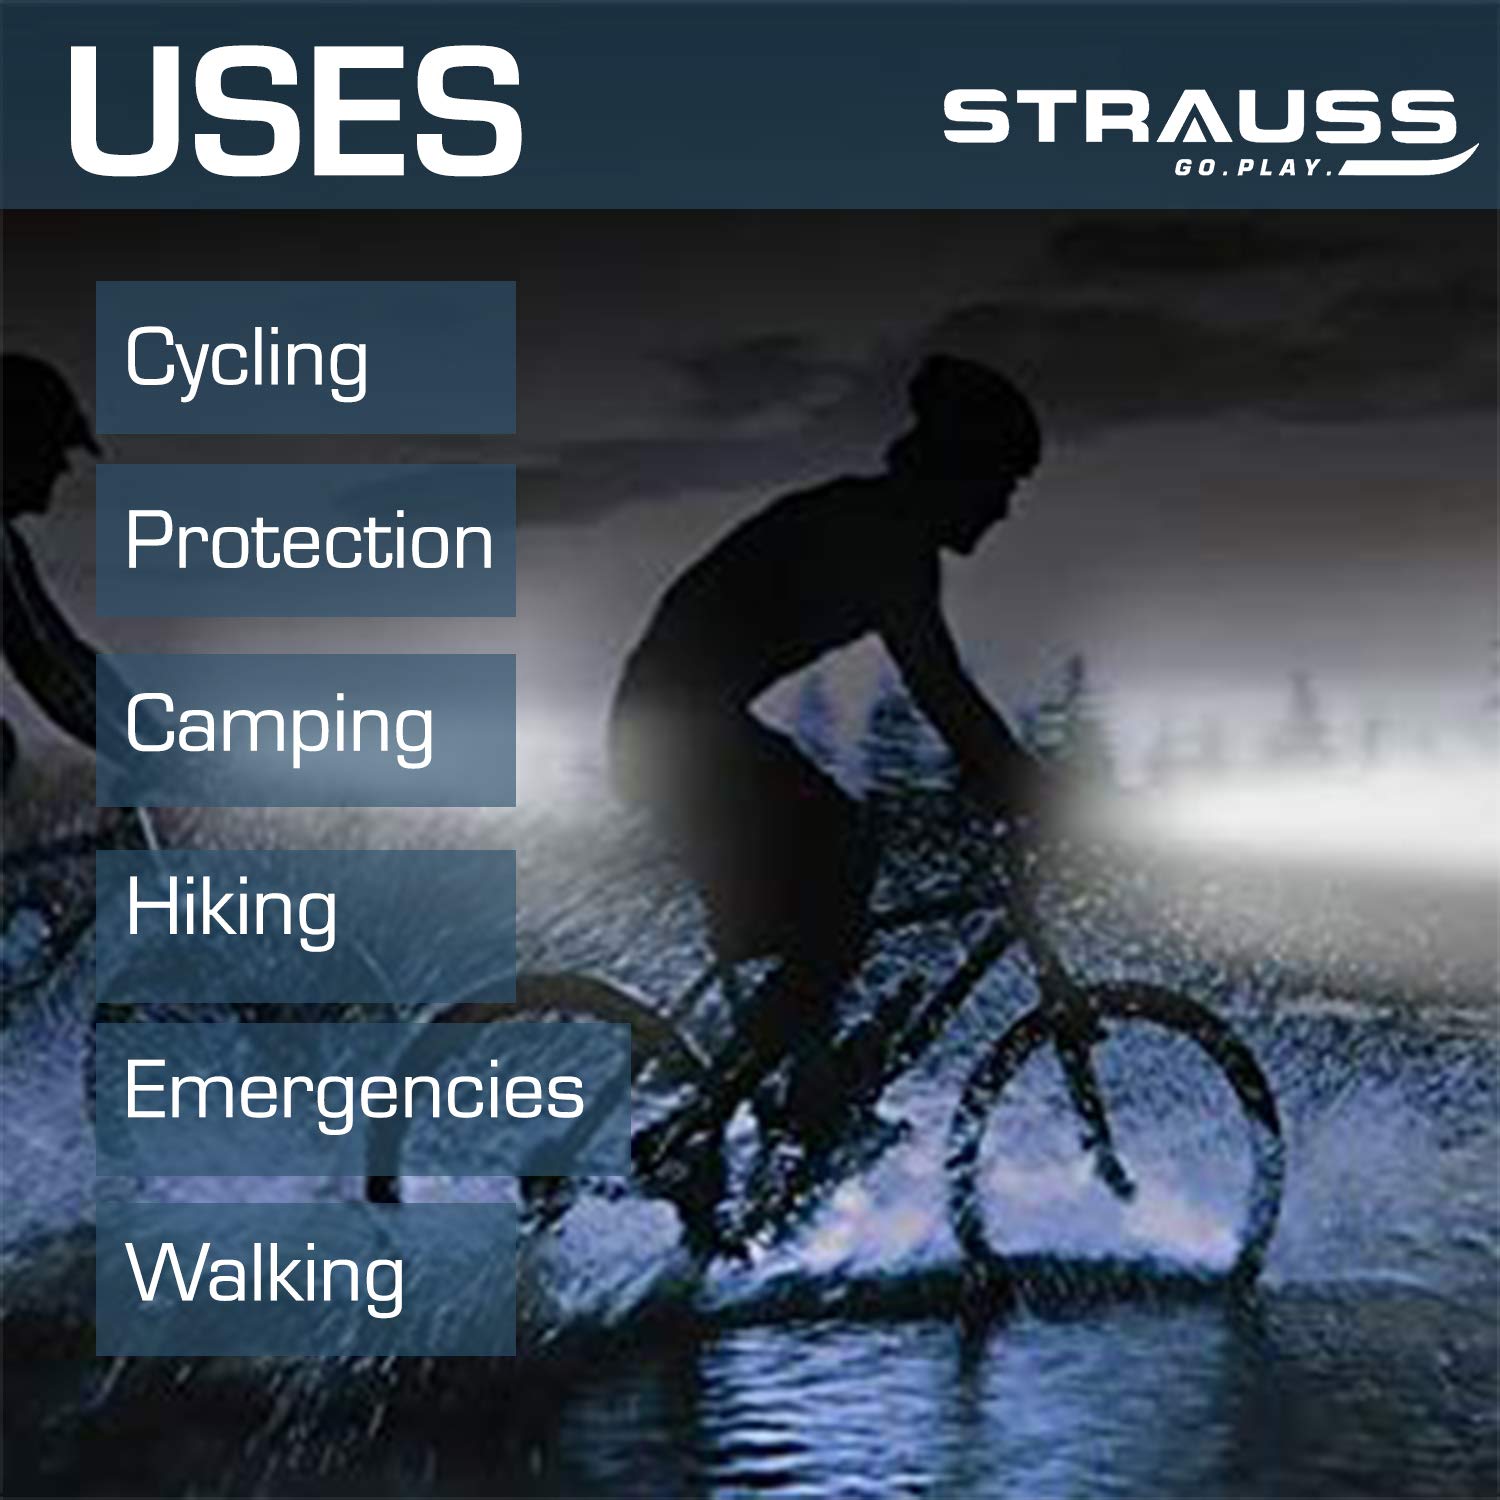 Strauss Bicycle Zoom LED Torch with Mount Holder